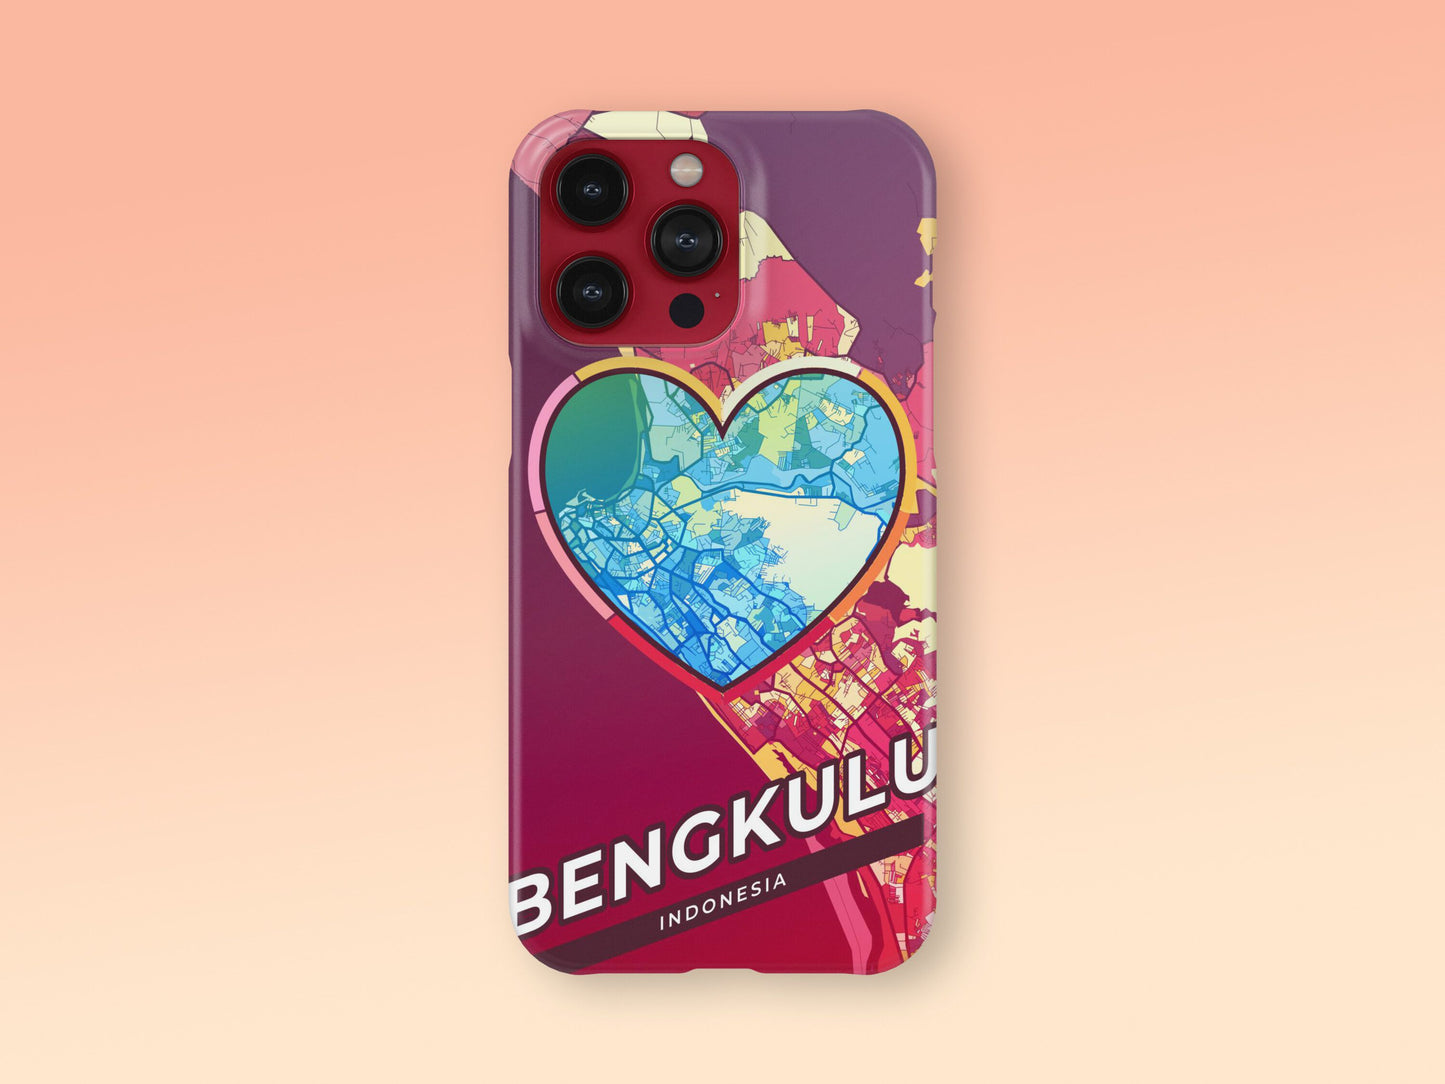 Bengkulu Indonesia slim phone case with colorful icon. Birthday, wedding or housewarming gift. Couple match cases. 2